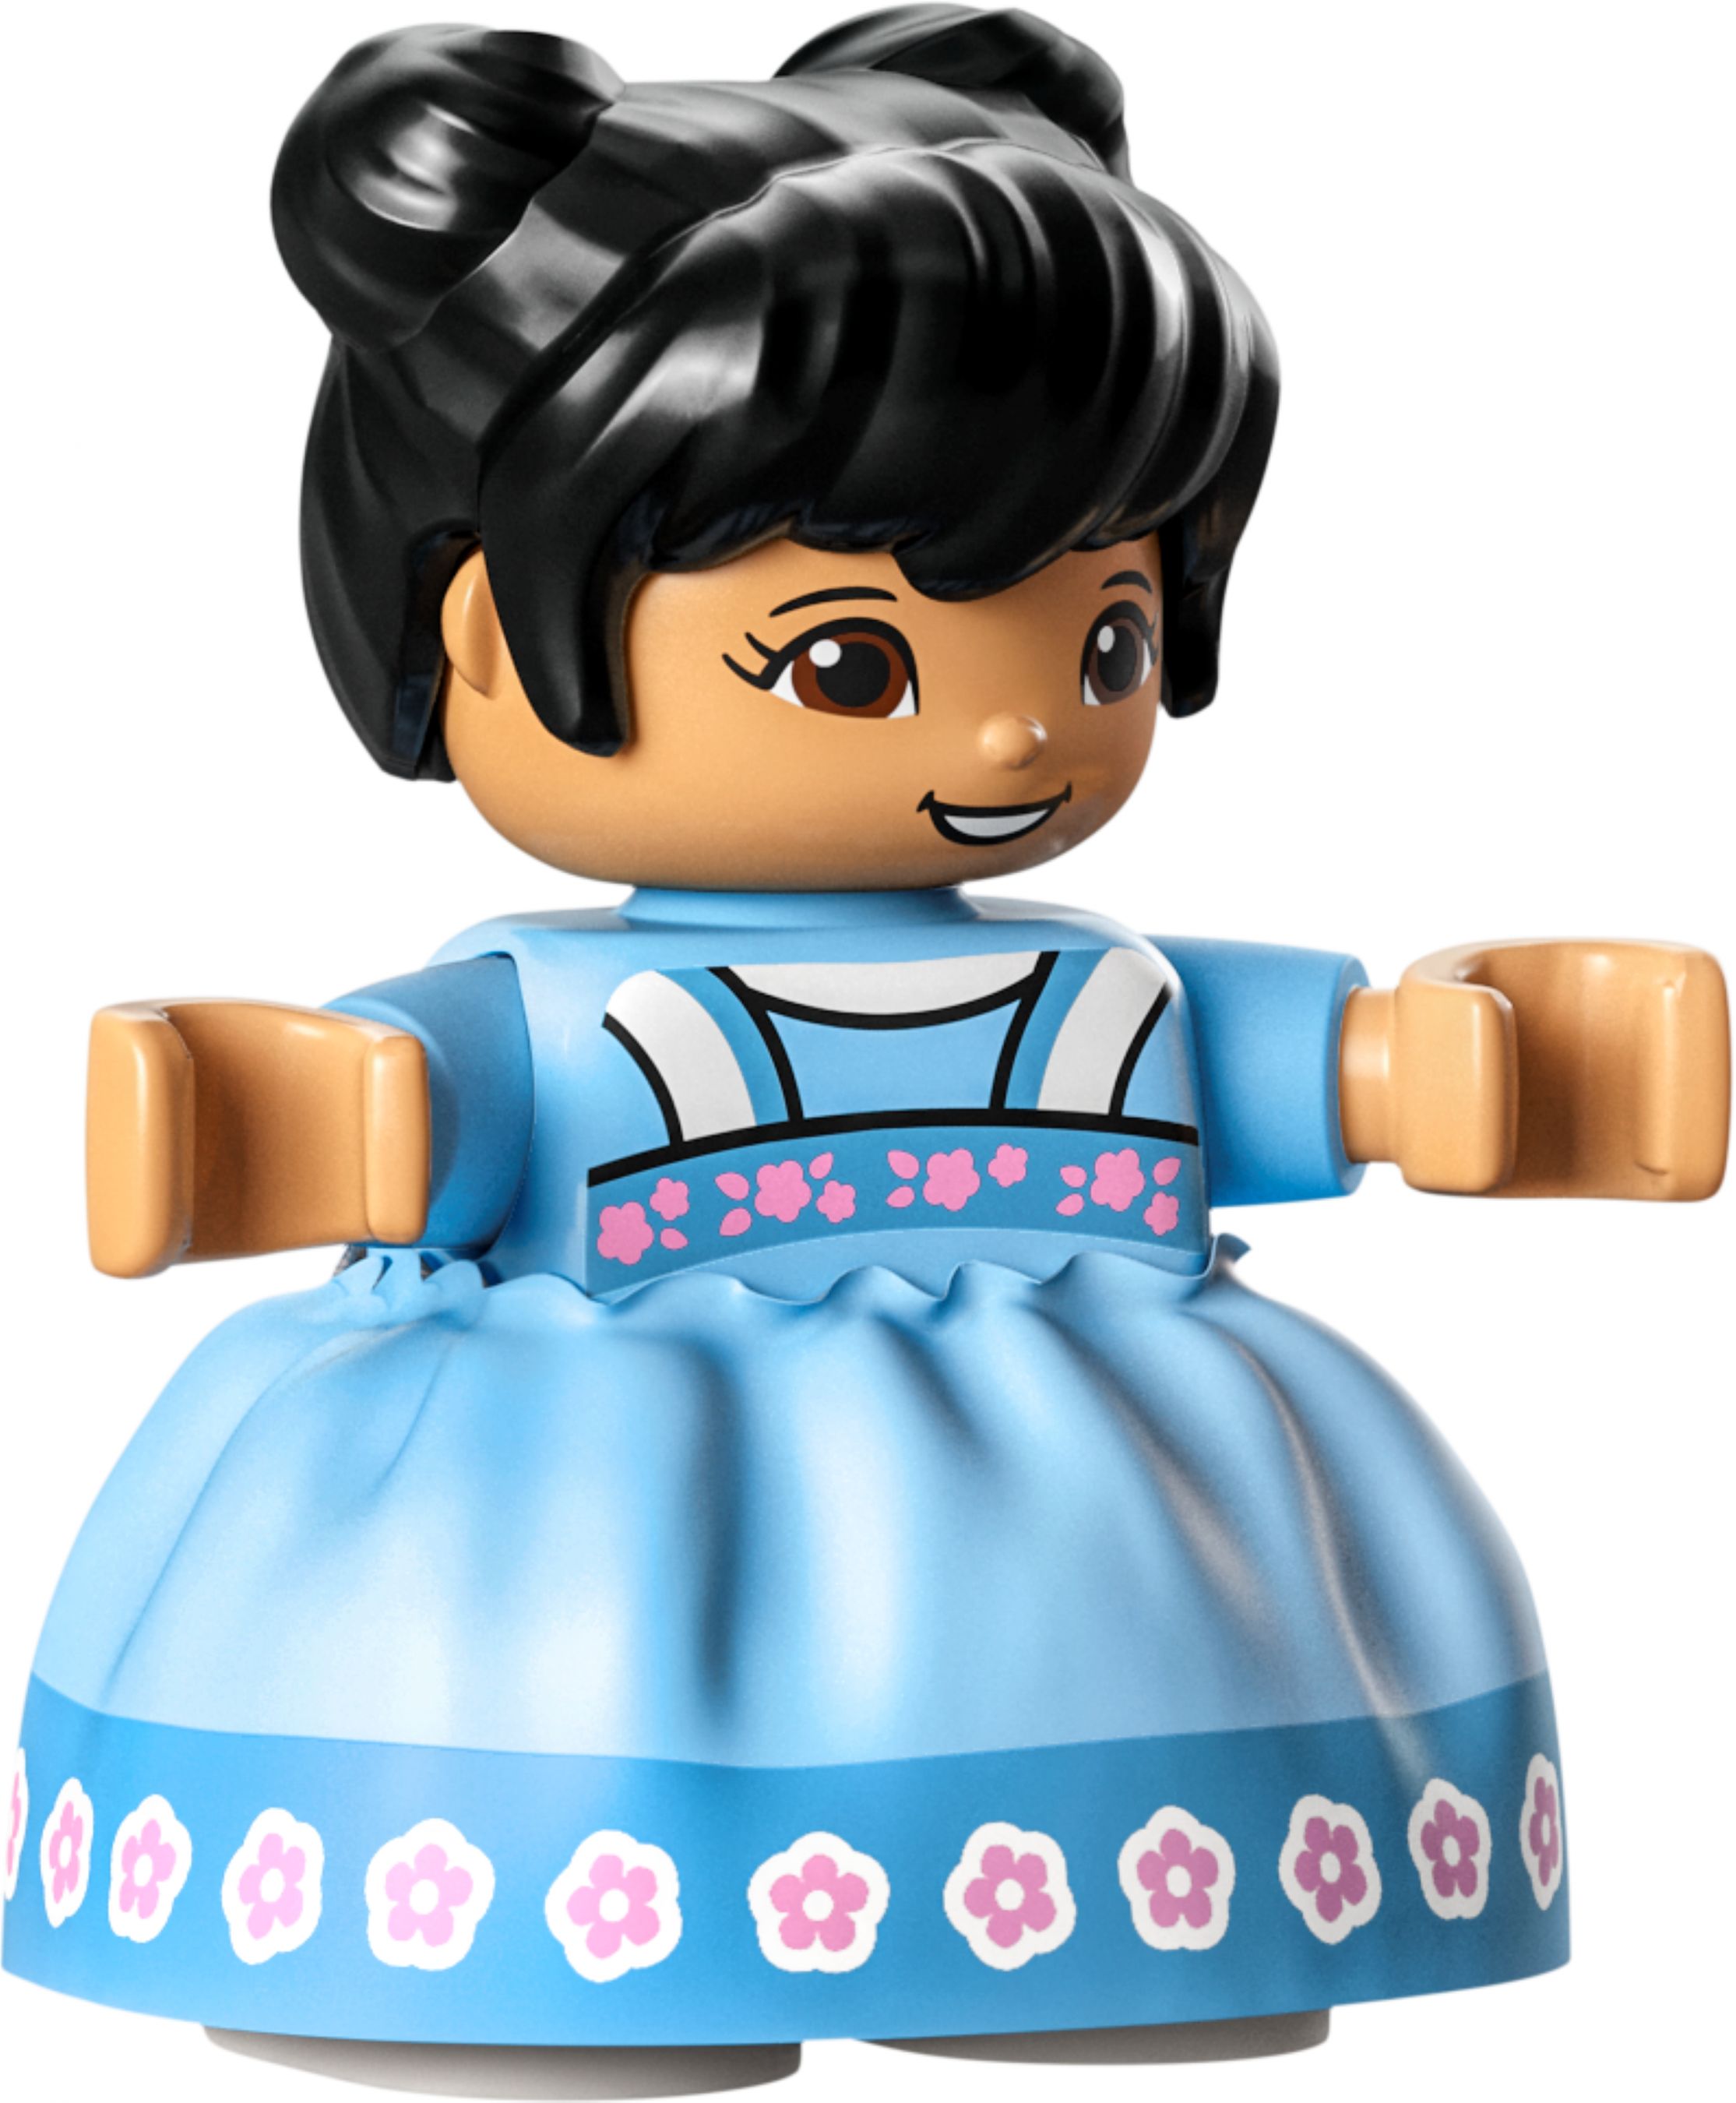 LEGO Duplo 10411 Learn about Chinese Culture LEGO_10411_alt7.jpg